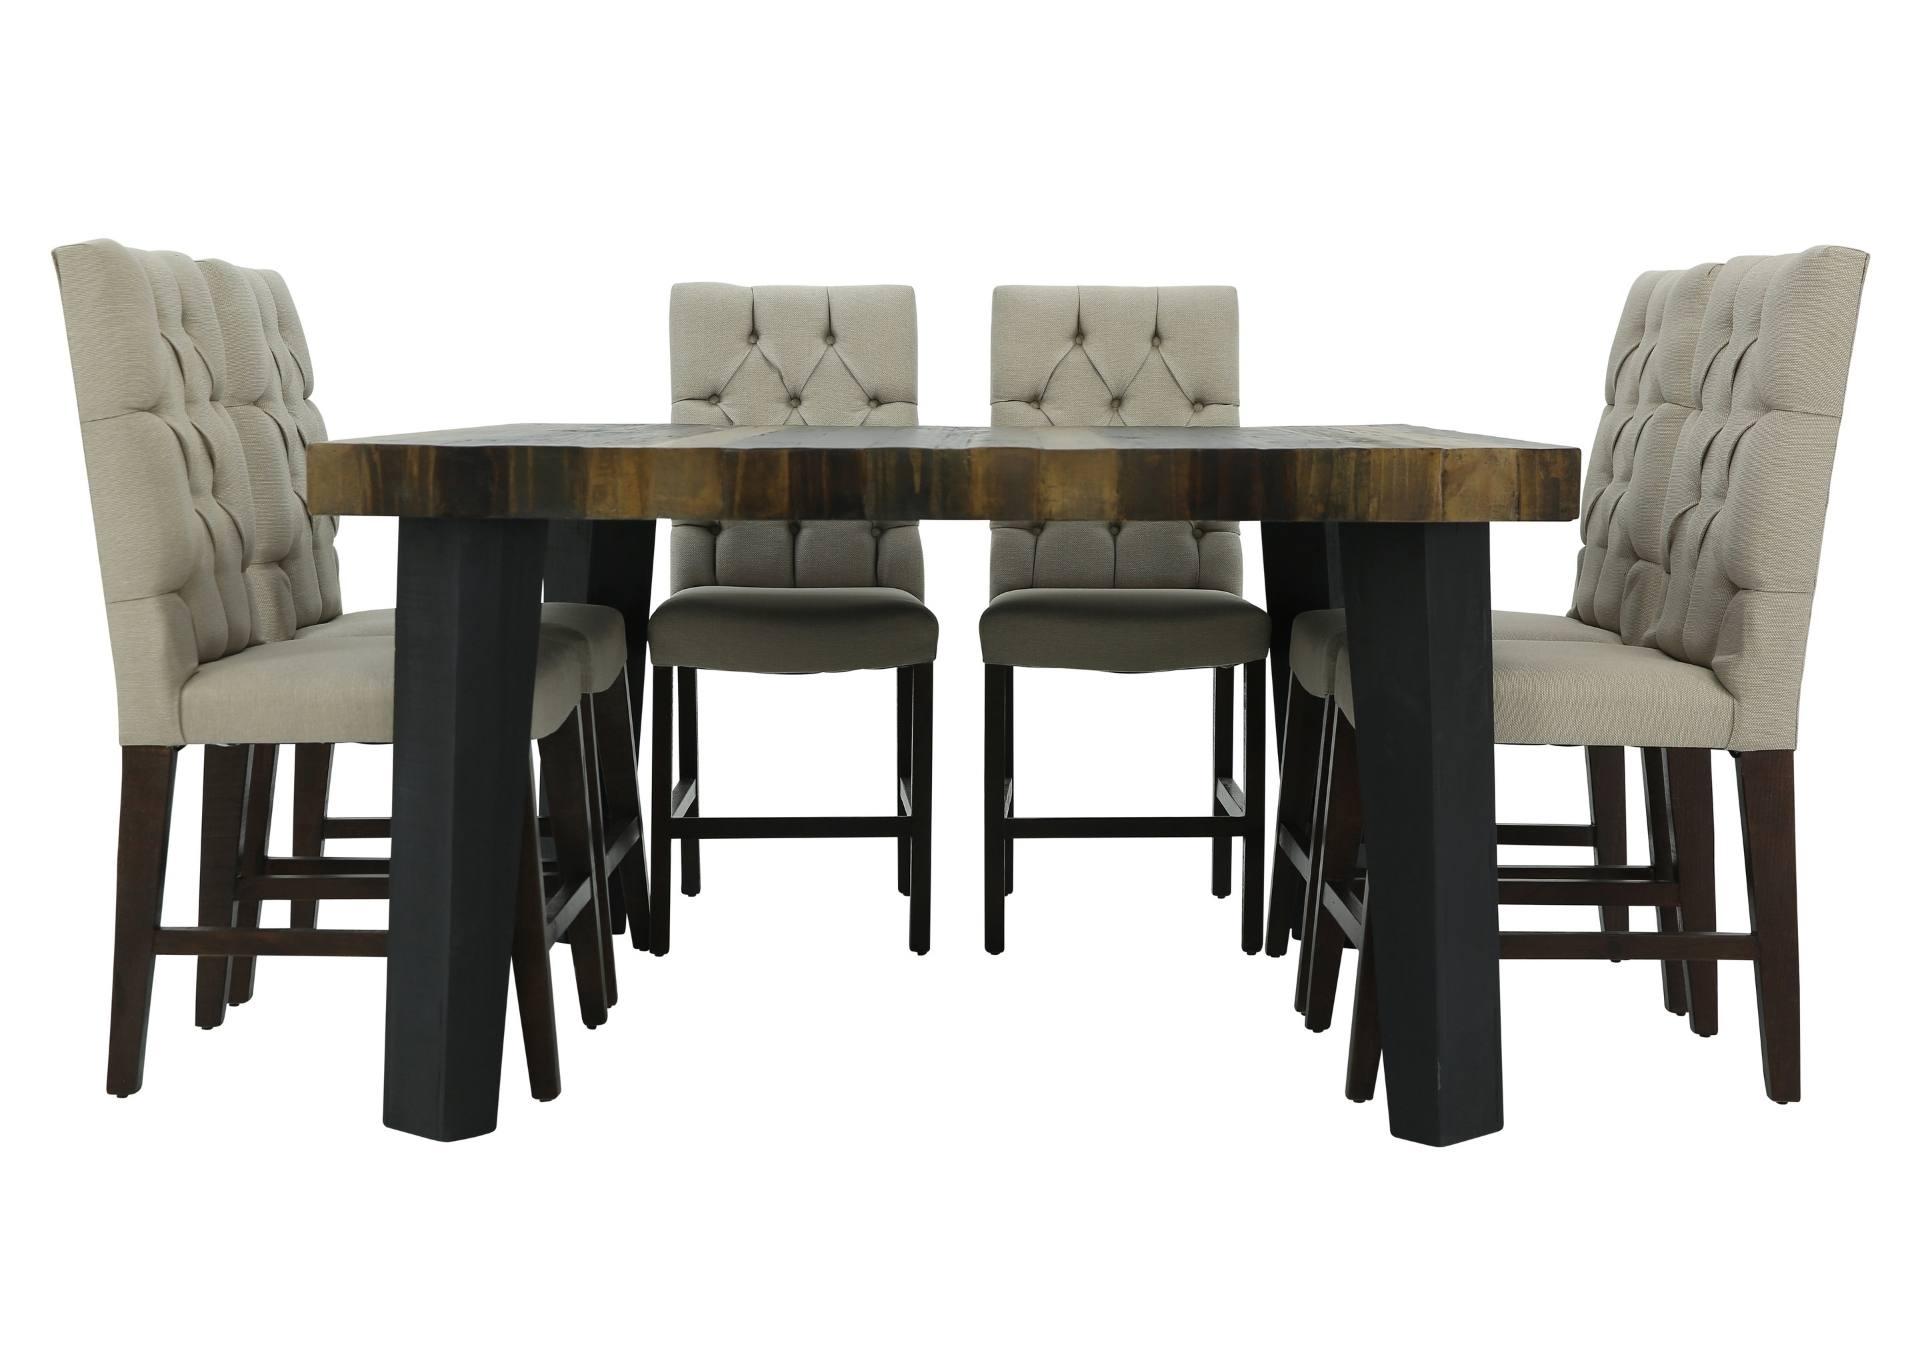 VICTORIA 7 PIECE COUNTER HEIGHT DINING SET